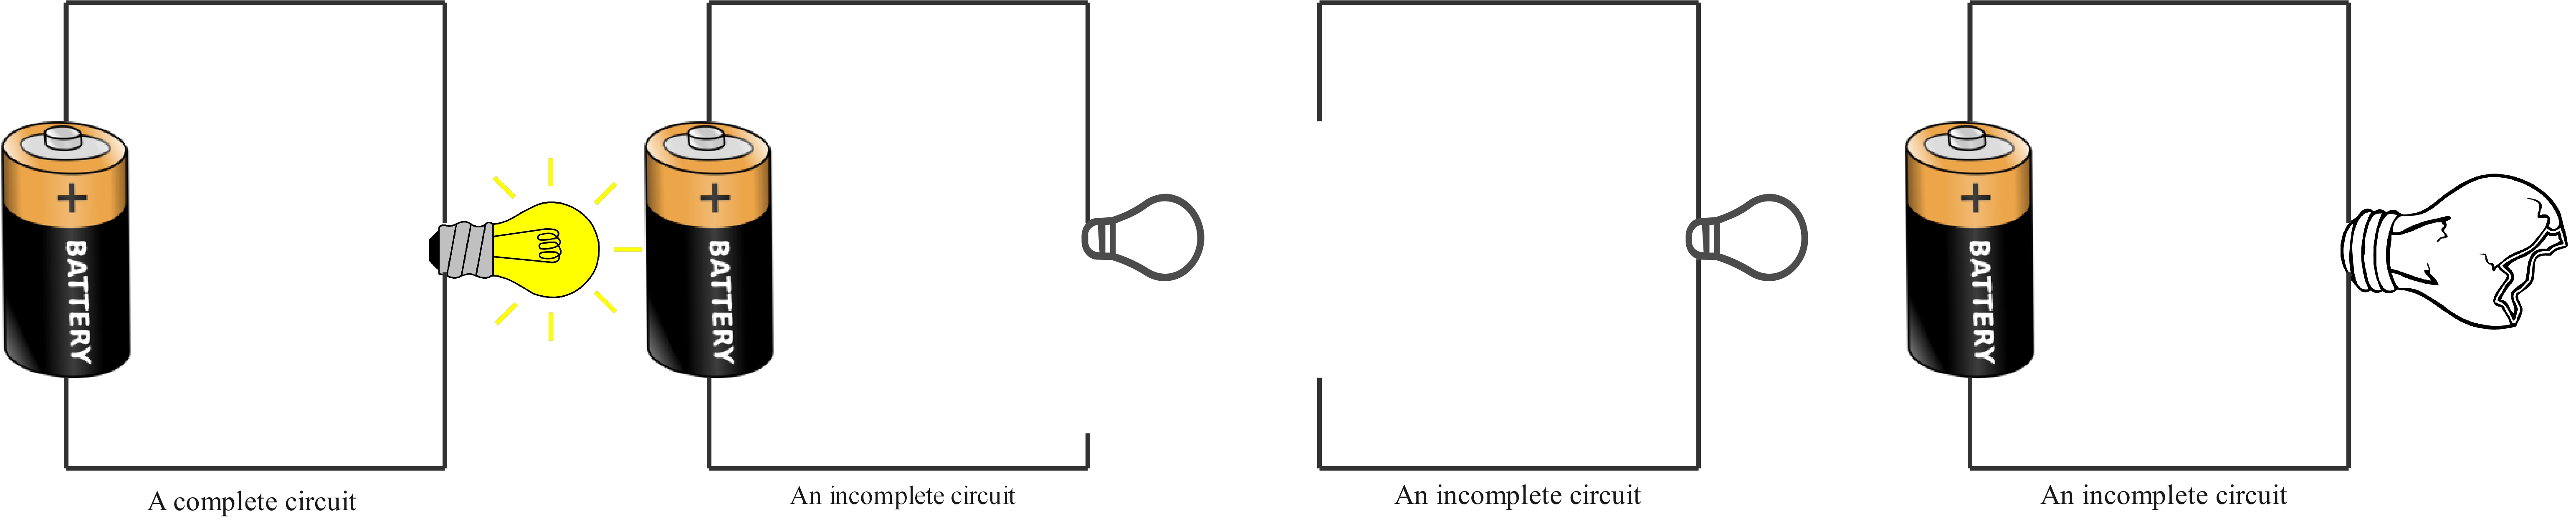 complete and incomplete circuits